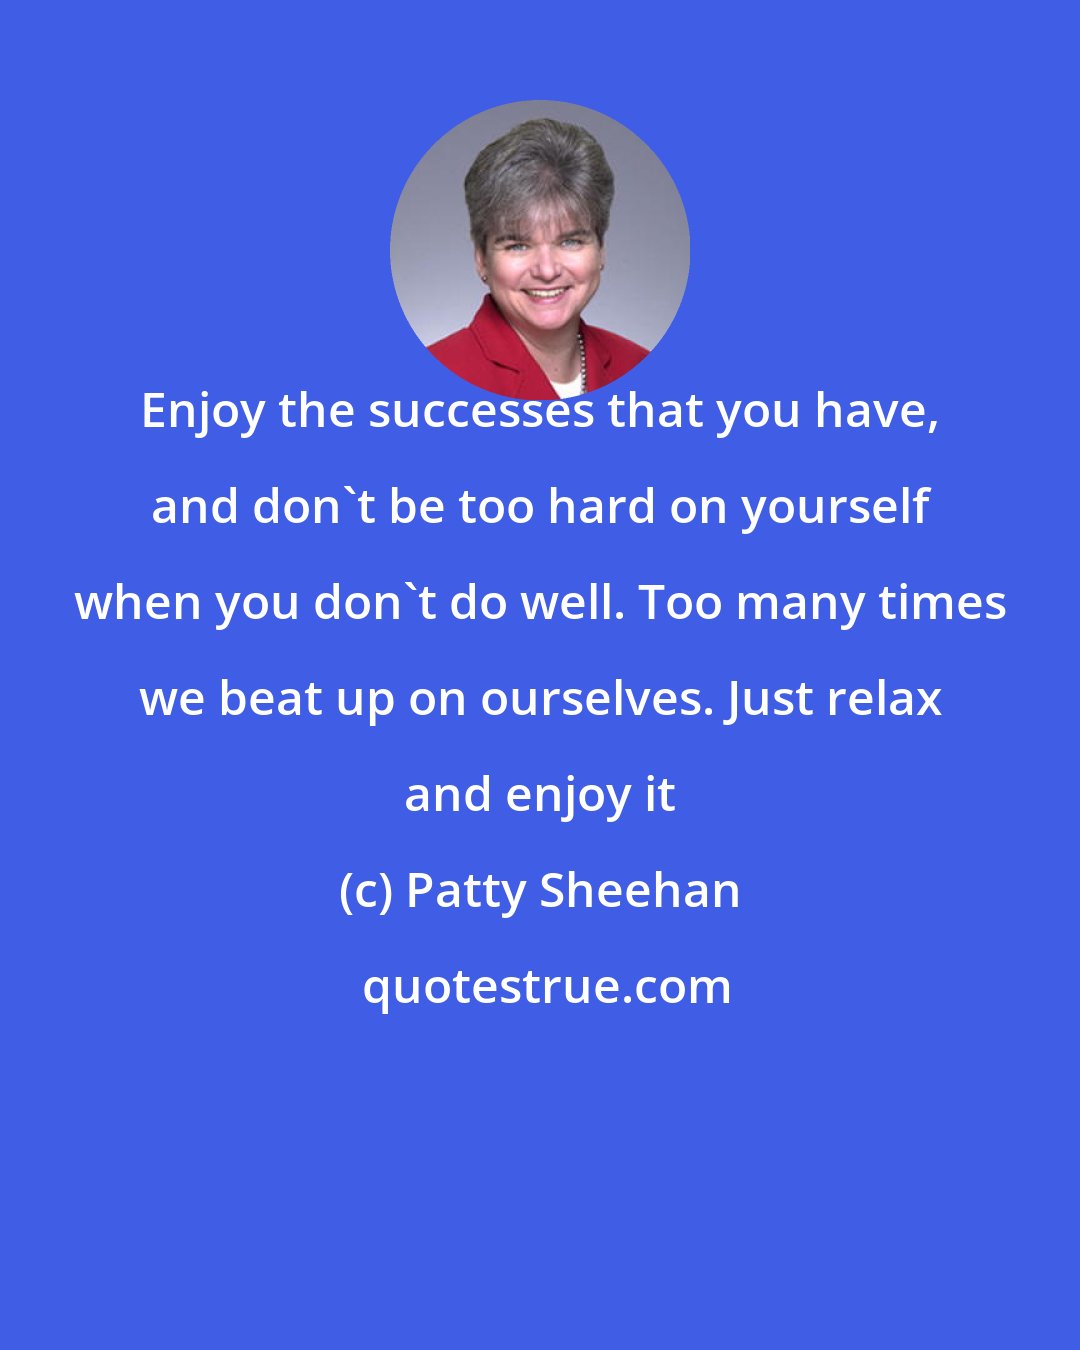 Patty Sheehan: Enjoy the successes that you have, and don't be too hard on yourself when you don't do well. Too many times we beat up on ourselves. Just relax and enjoy it